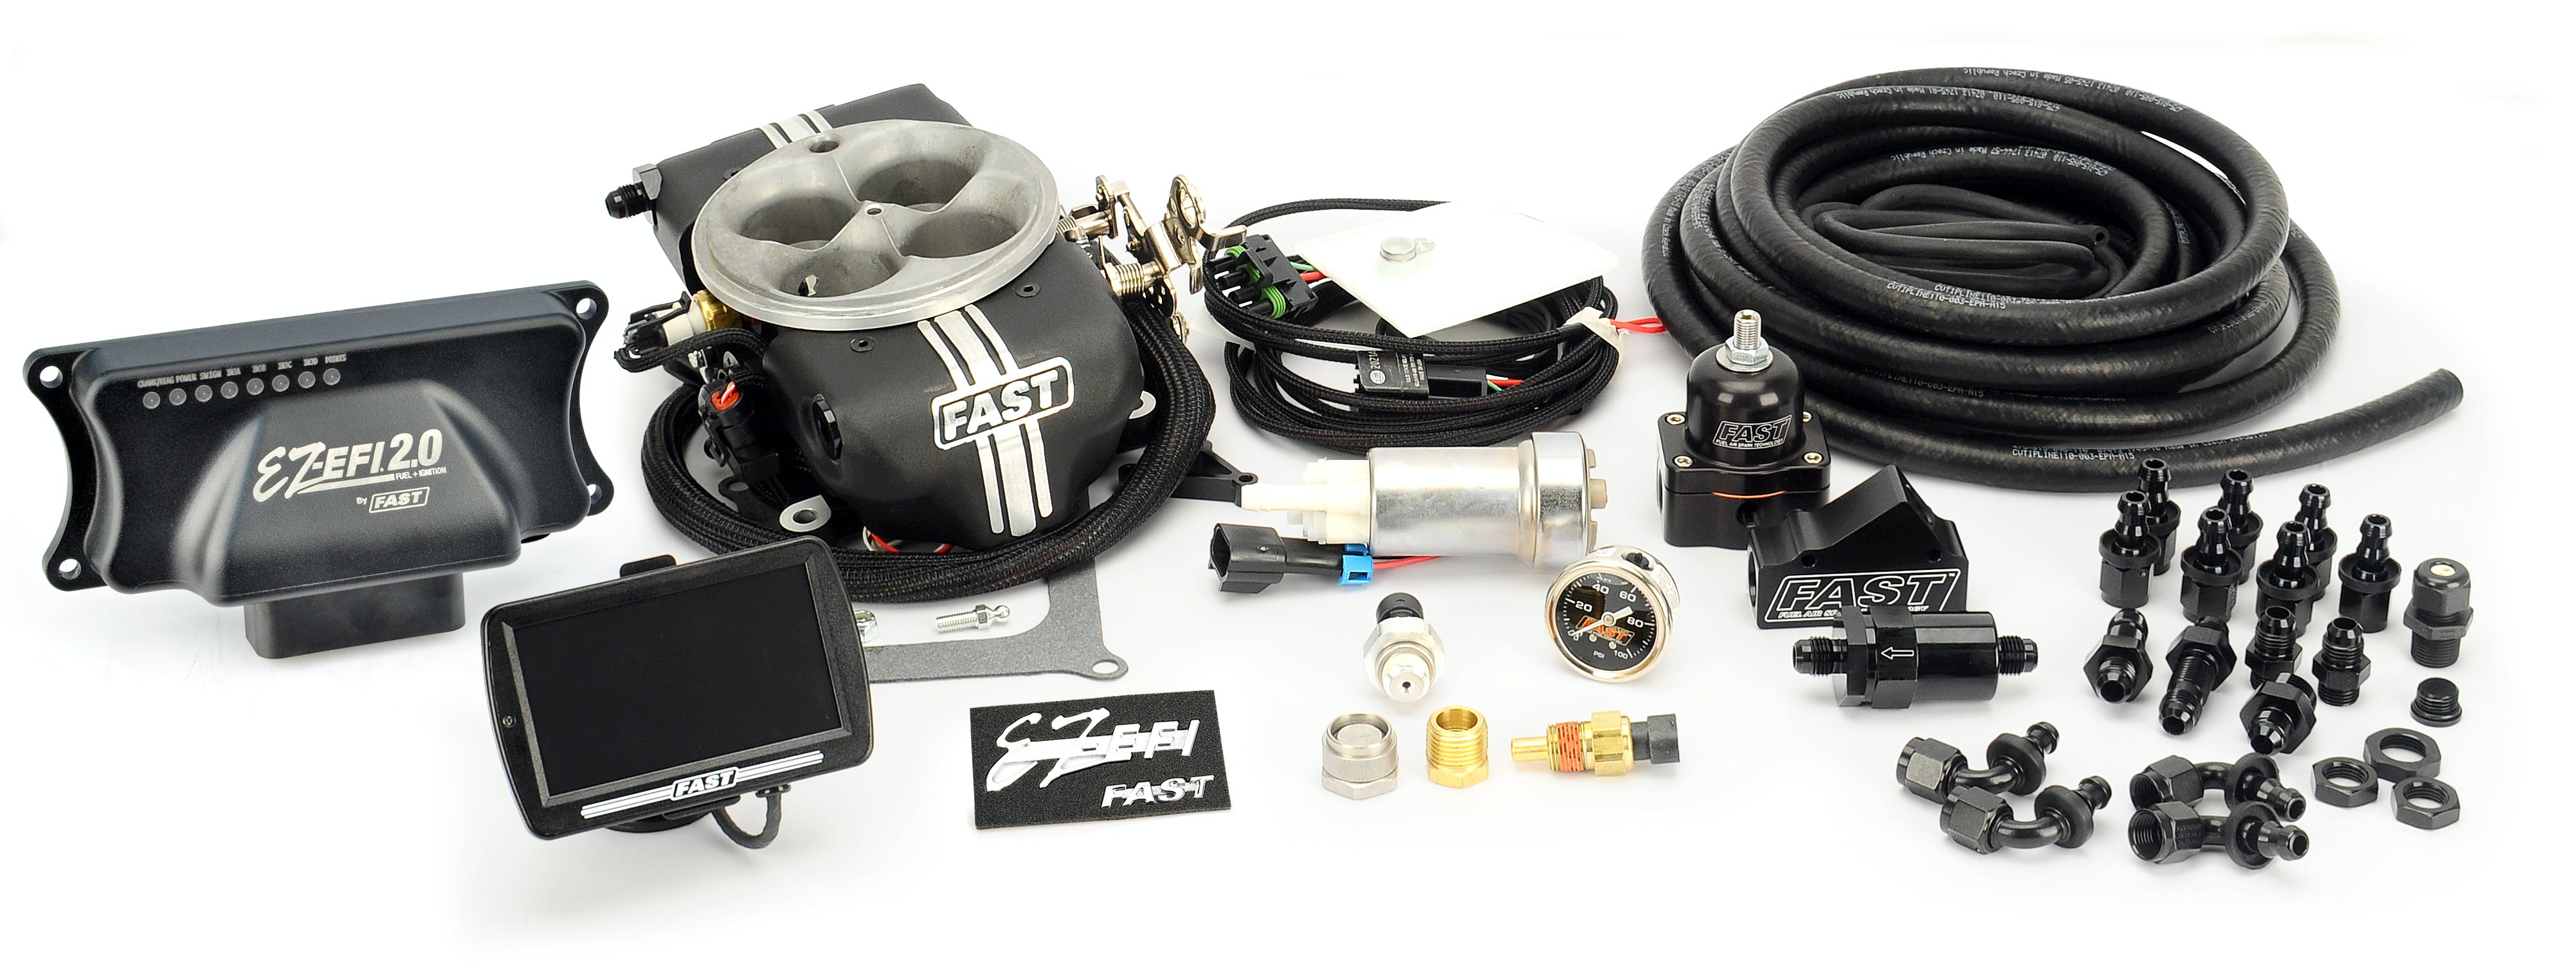 FAST - Fuel Air Spark Technology 30401-KIT EZ 2.0 Base Kit with Touchscreen, Throttle Body and In-Tank Pump Kit